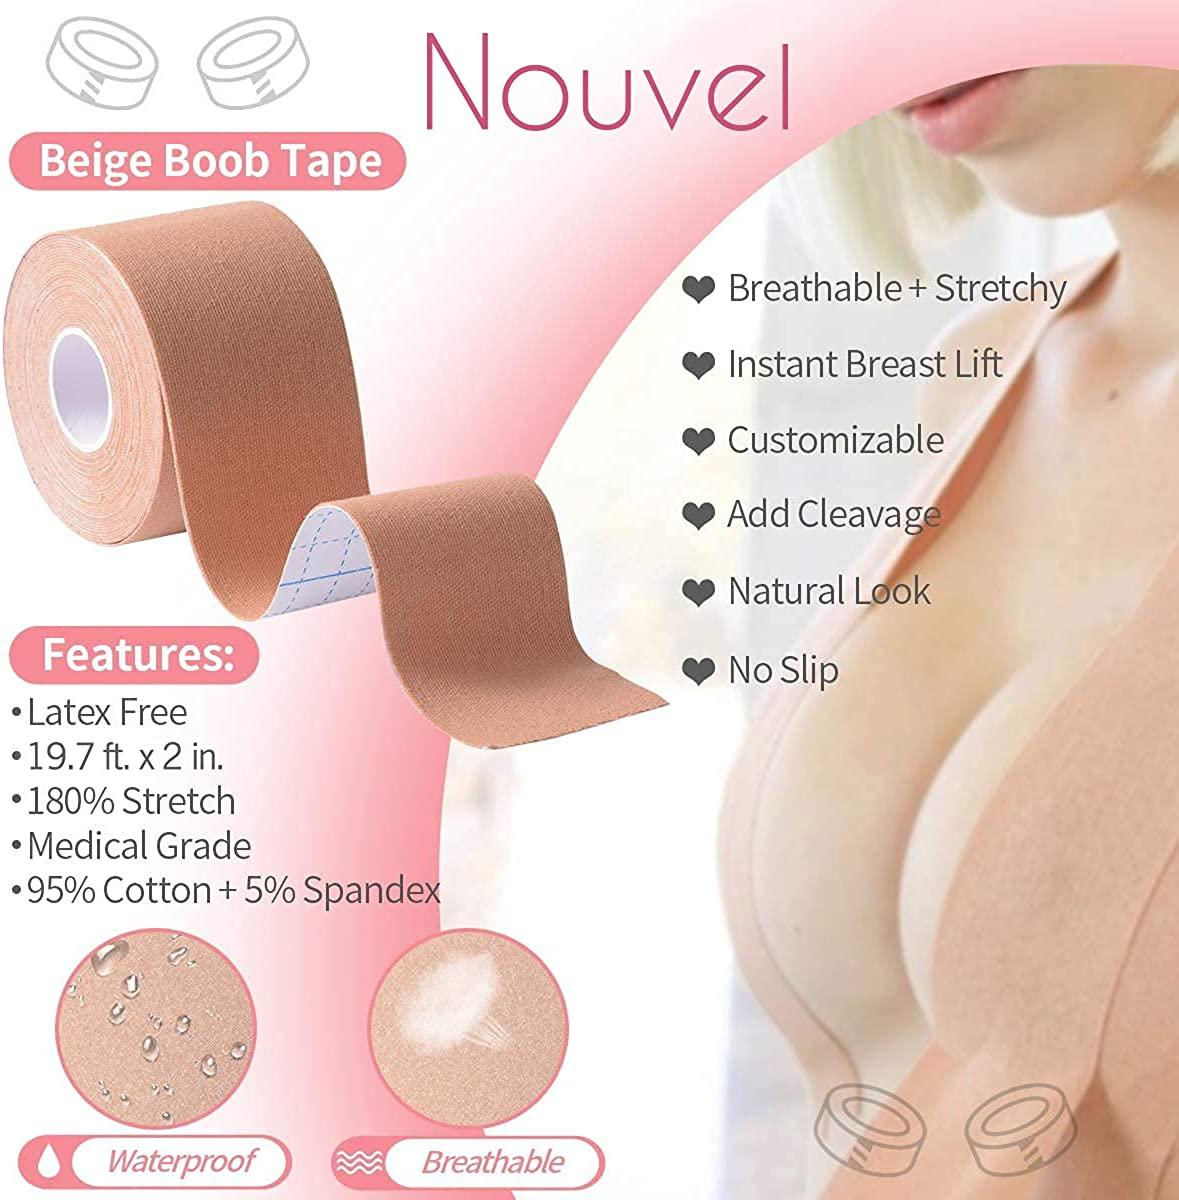 Boob Tape Value Roll - 20% Longer Than Other Brands - 19.7 Feet (6 Meters)  x 2 in. - Strong Hold, Gentle on Skin - Waterproof, Sweatproof - Includes  Soft, Reusable Nipple Covers - Breast Lift Tape